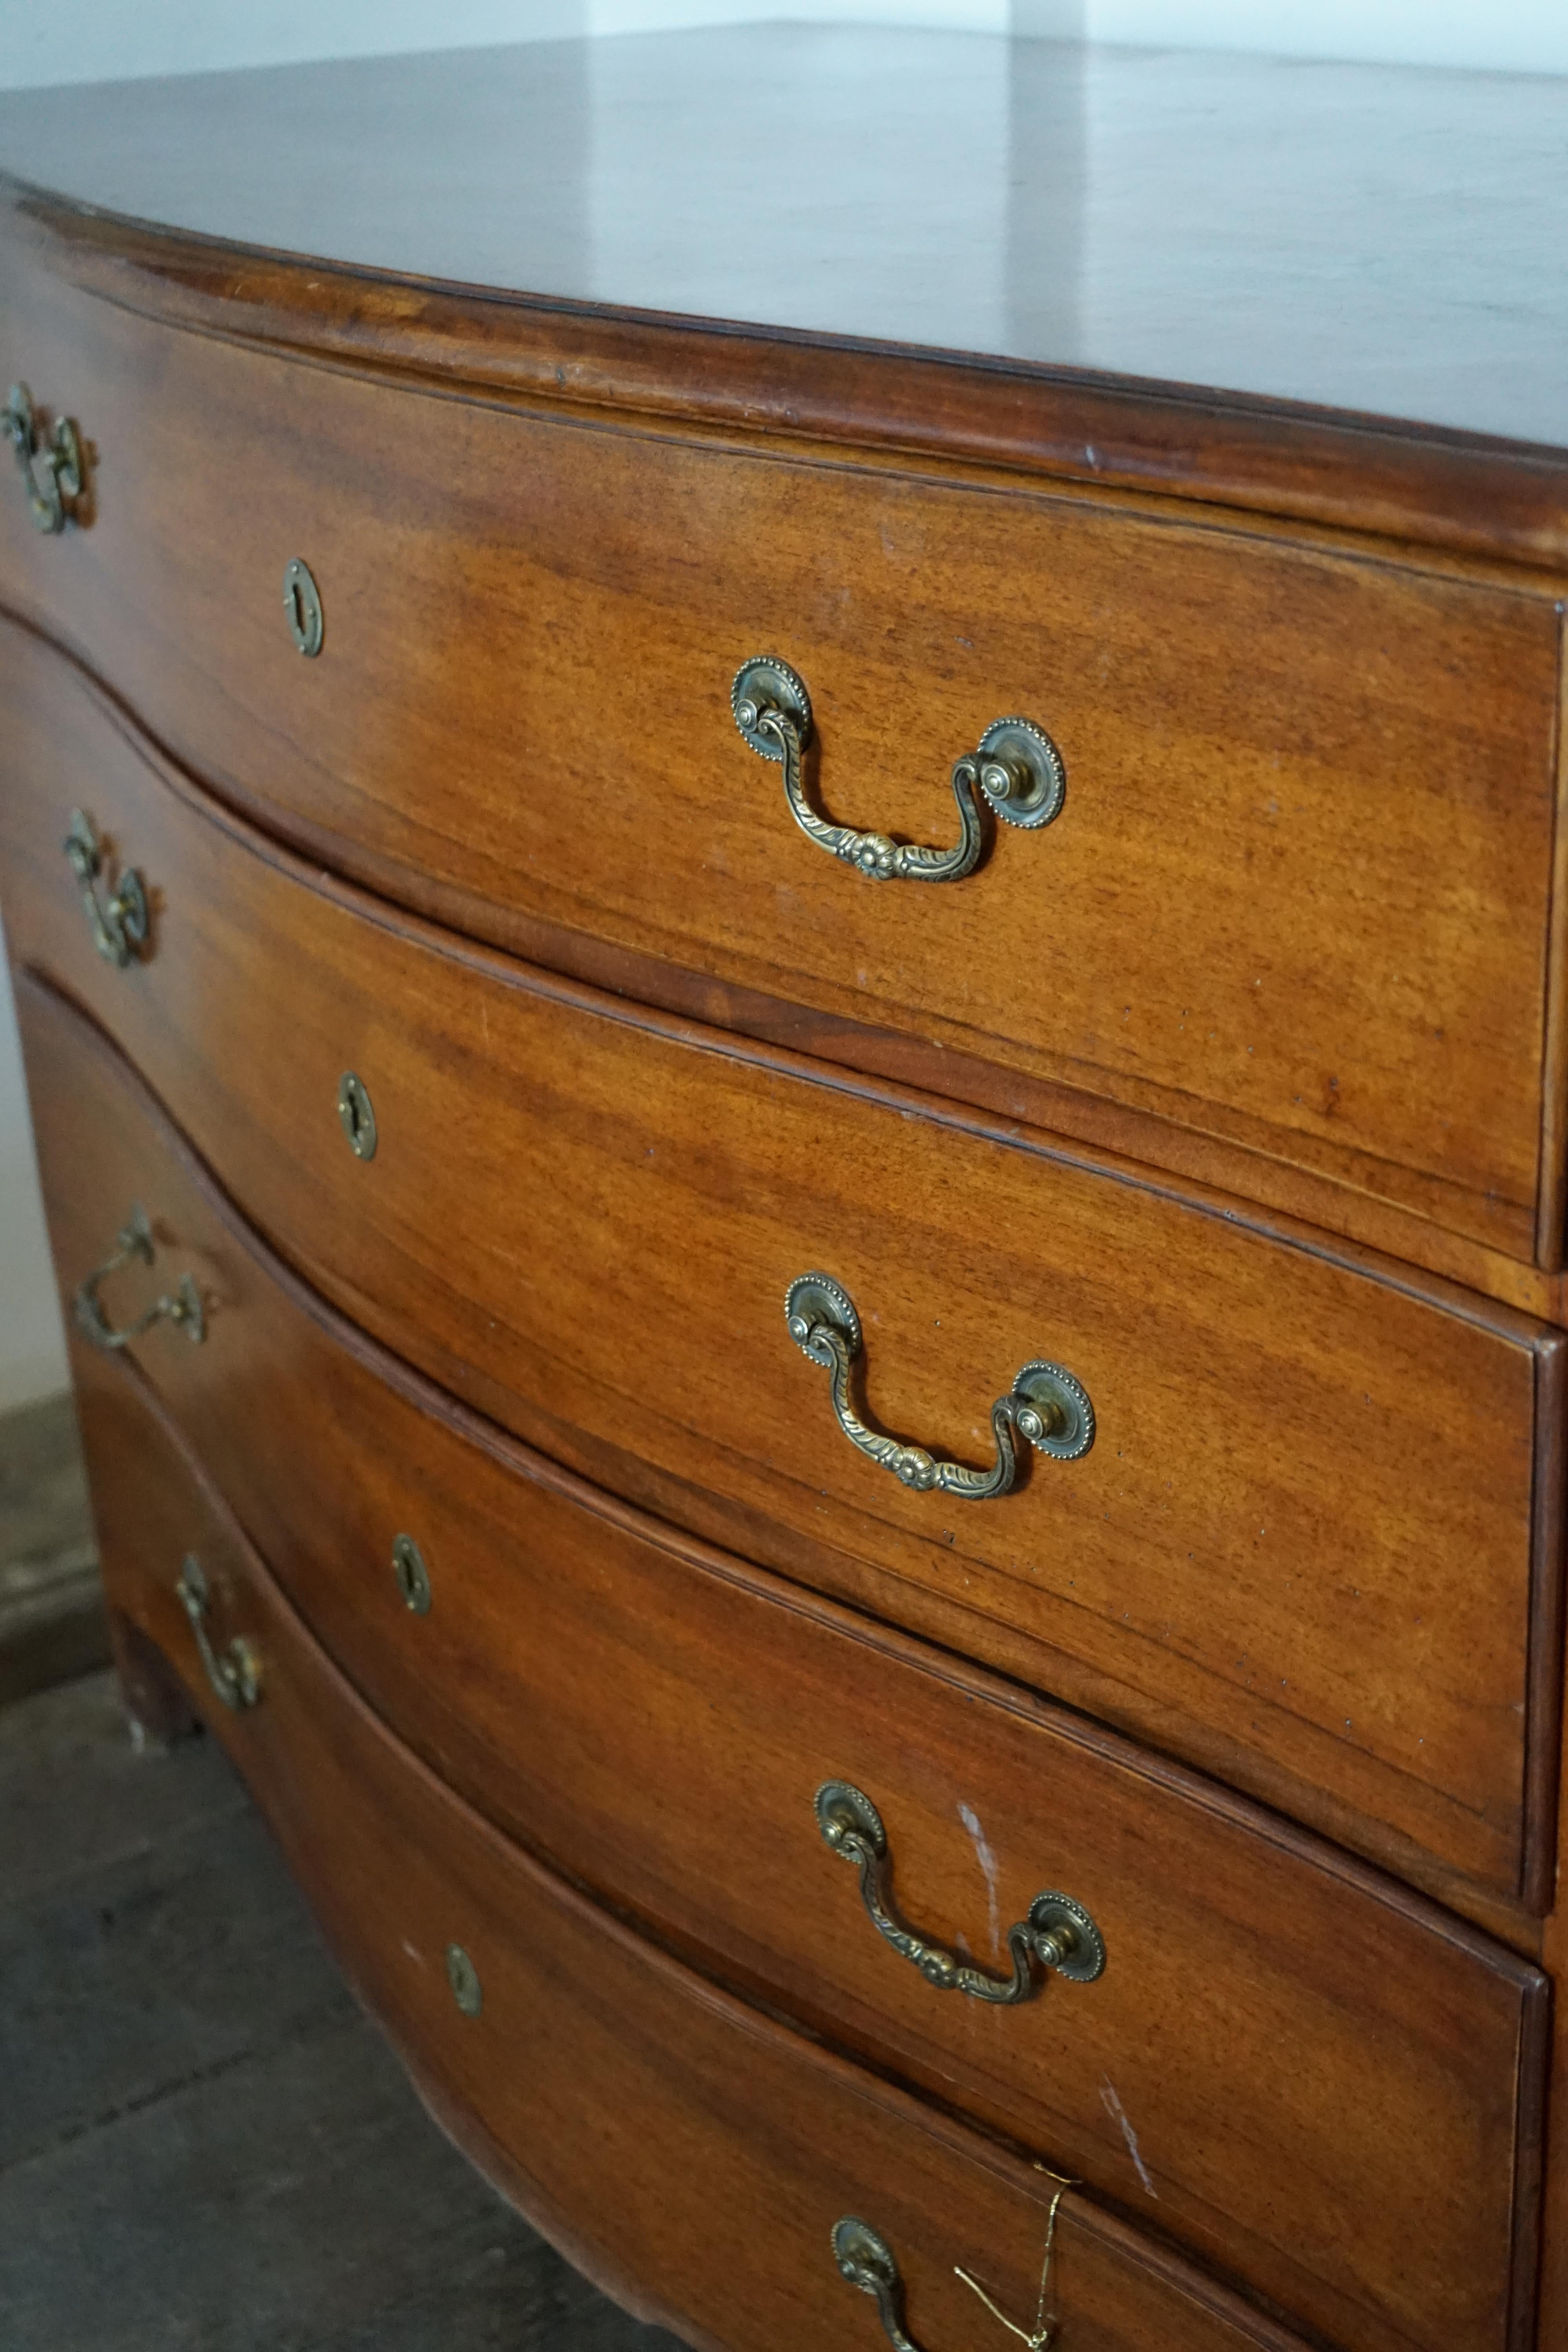 This beautiful 19th century French piece of furniture features four large deep drawers for storage. 

Measurements: 51.5'' L x 28.25'' D x 39.15'' H.